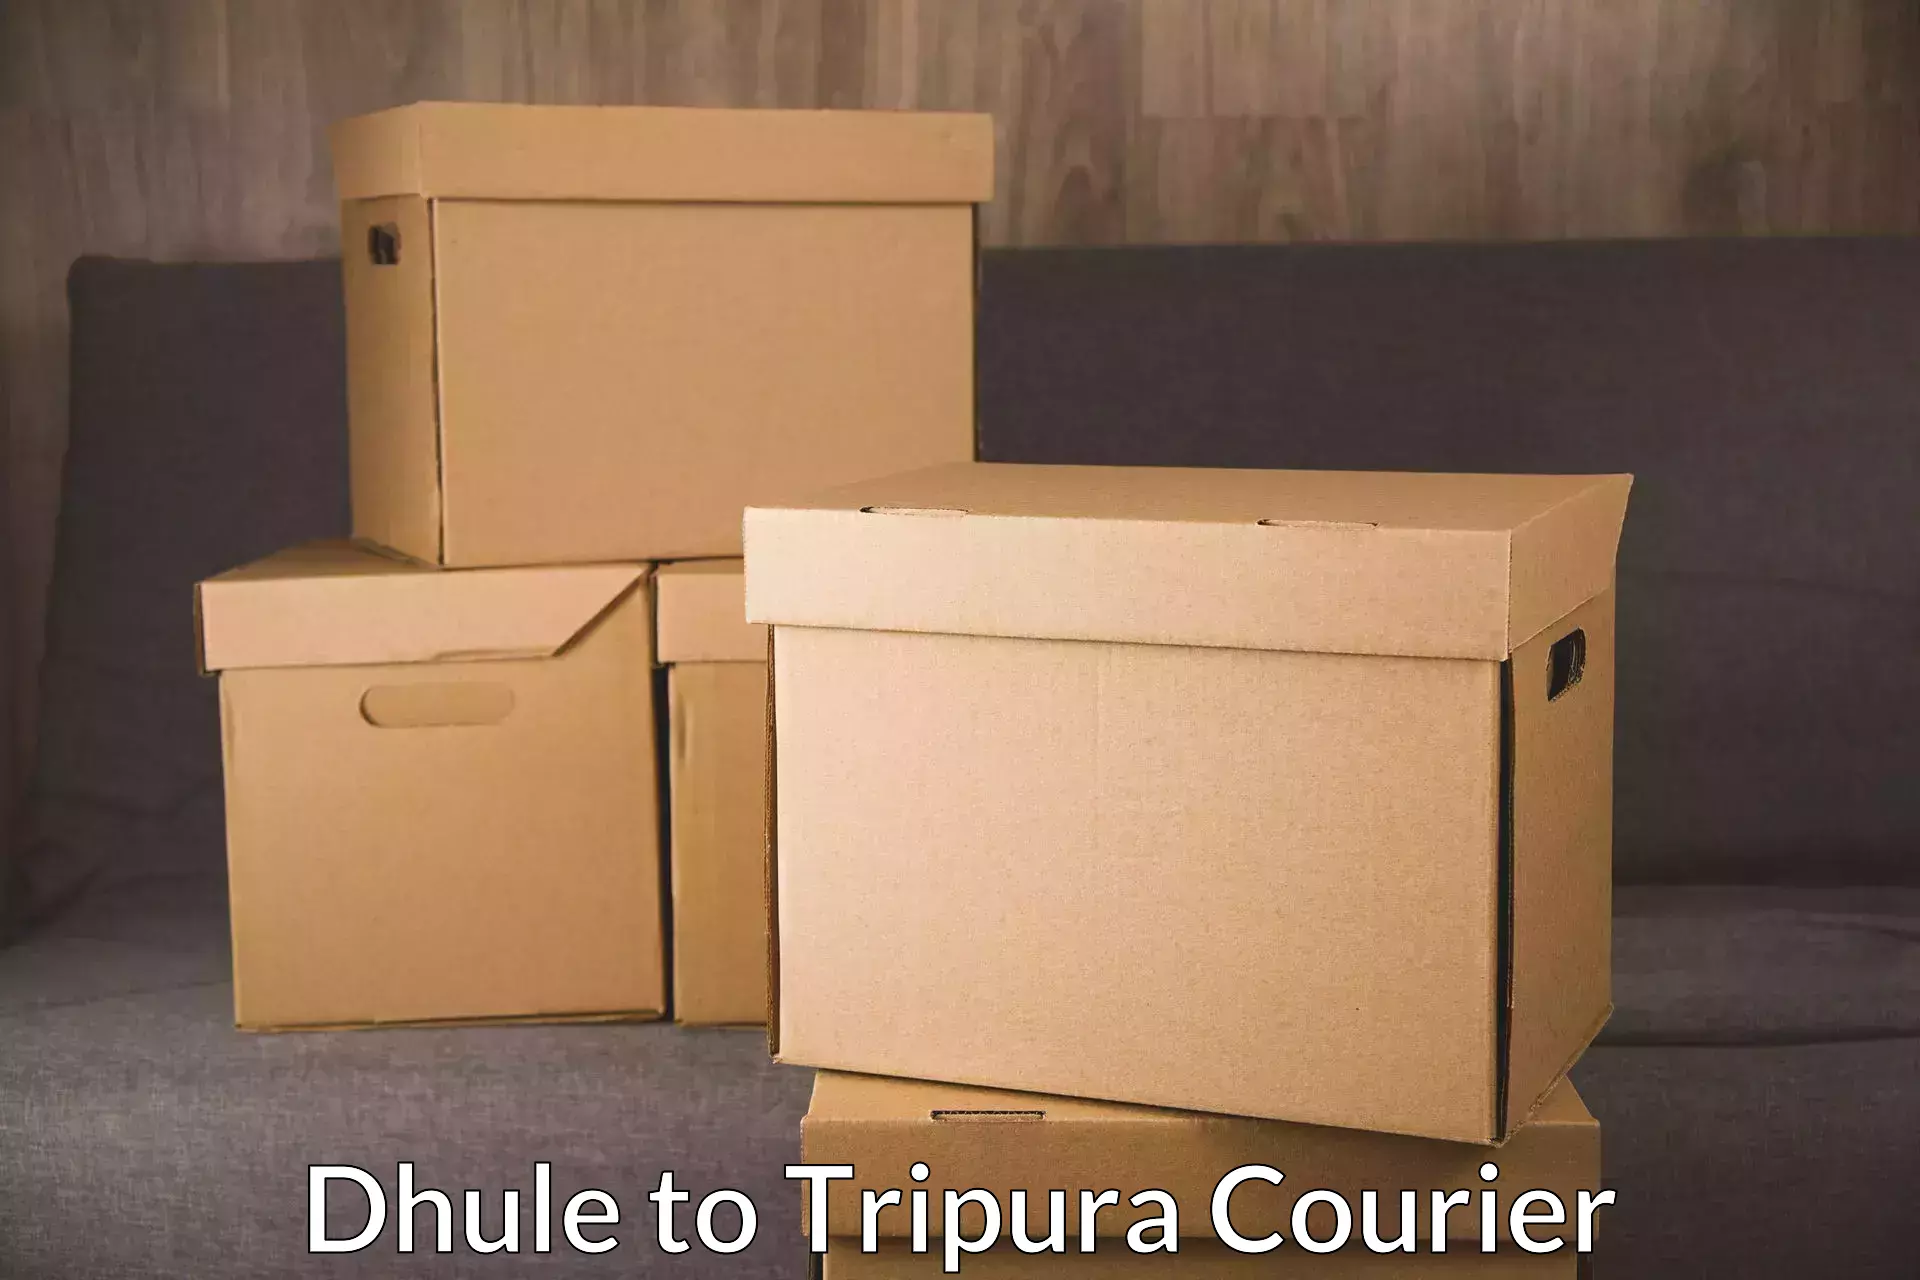 High-speed delivery Dhule to Udaipur Tripura